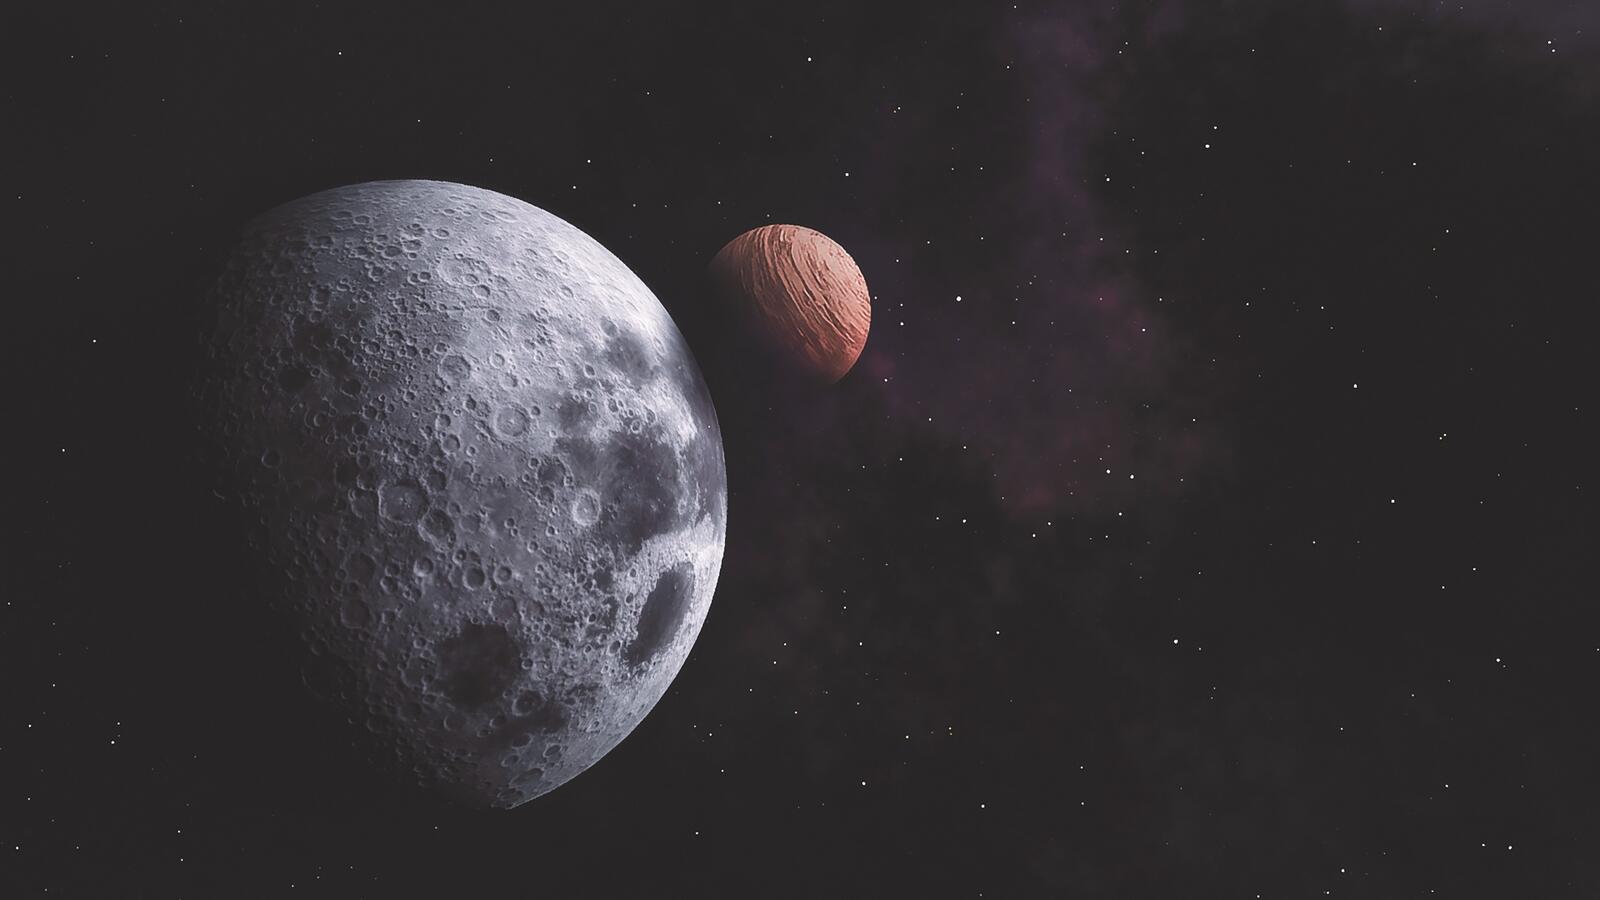 Wallpapers stars planets companion on the desktop